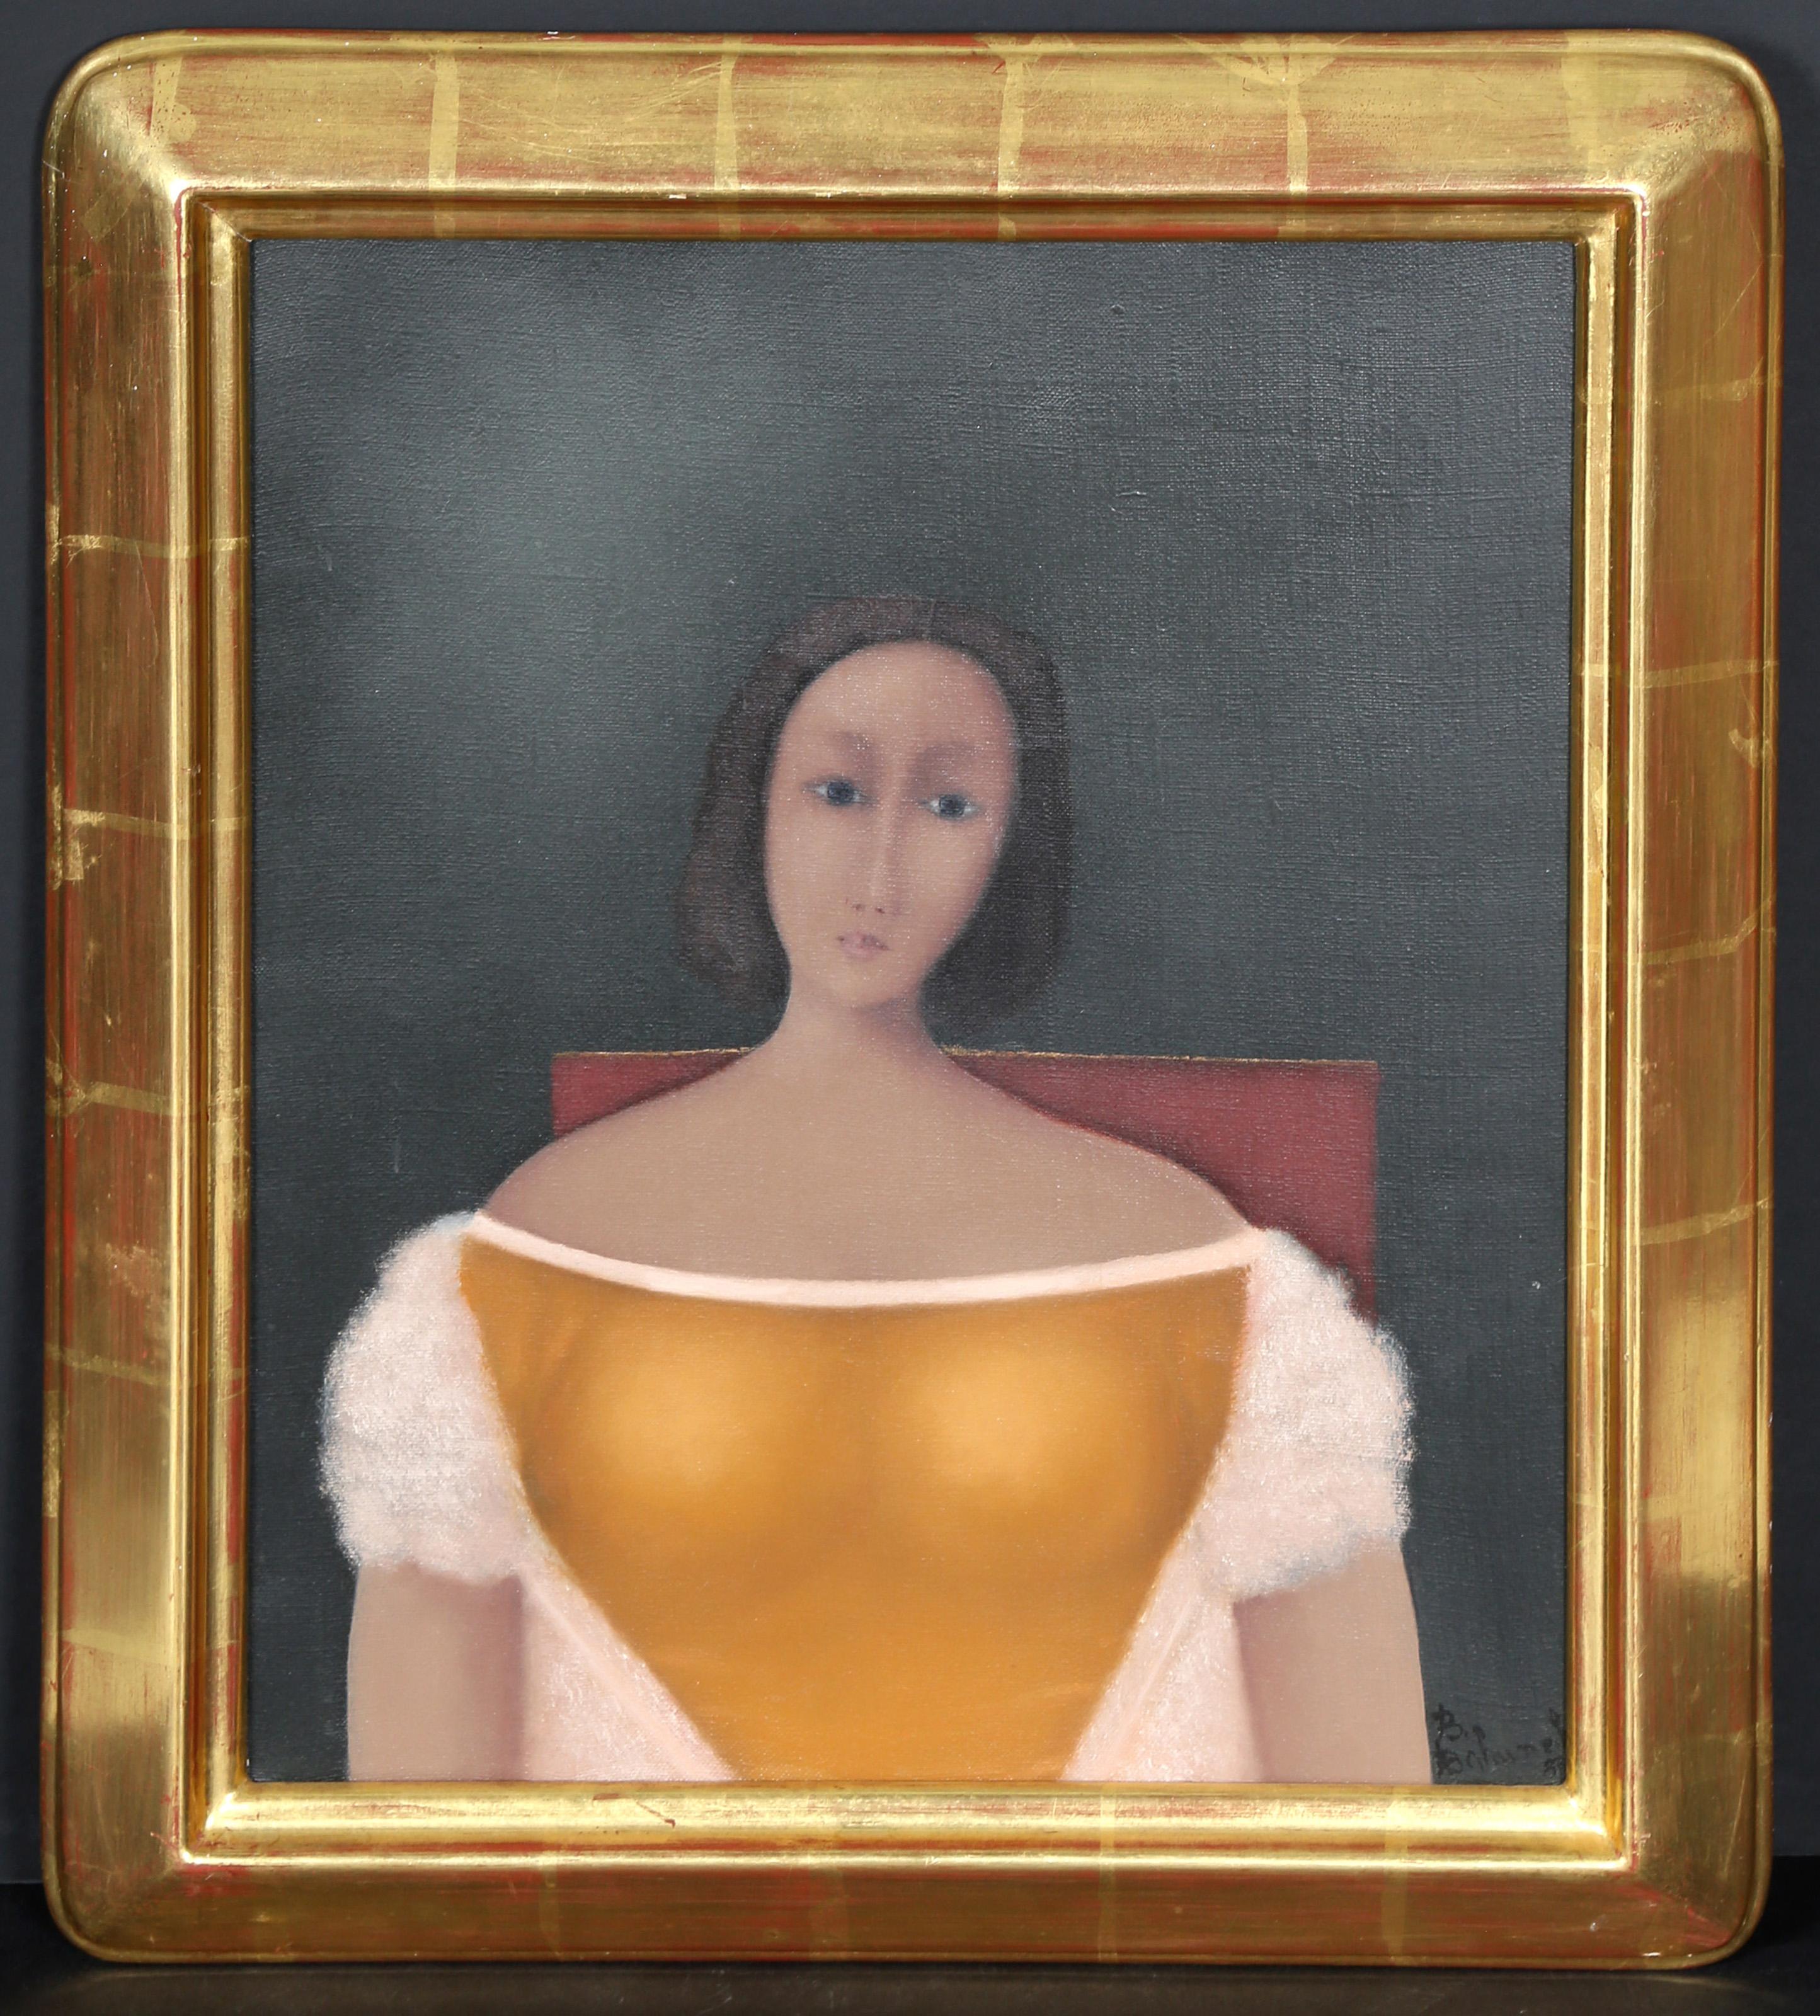 A simple portrait by Branko Bahunek of a woman in a gold gown. This piece is rendered using oil paint on canvas. The work is nicely housed in a gold leaf frame.

Woman Sitting
Branko Bahunek, Croatian (1935)
Date: 1987
Oil on Canvas, signed and